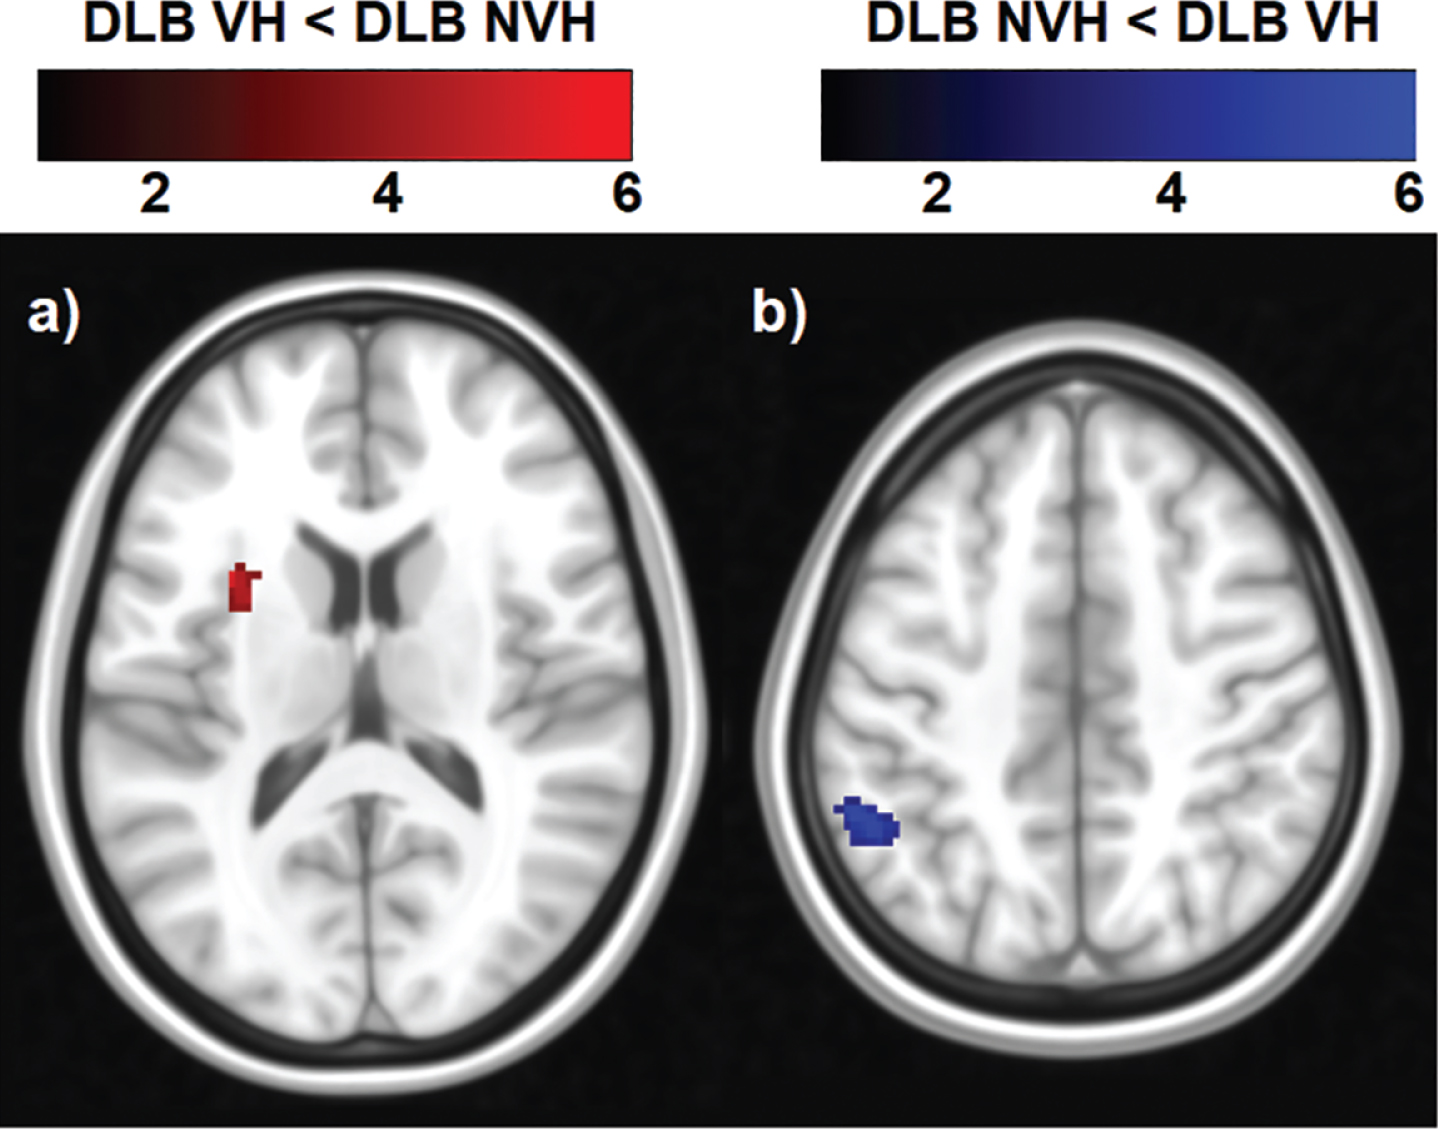 Regions of decreased and increased functional connectivity within the DMN in DLB patients with VH compared with those without. The color bar indicates the z scores with a cluster-level threshold of p < 0.05 Family-Wise Error corrected for multiple comparisons with total intracranial volume and age as covariates of no interest.